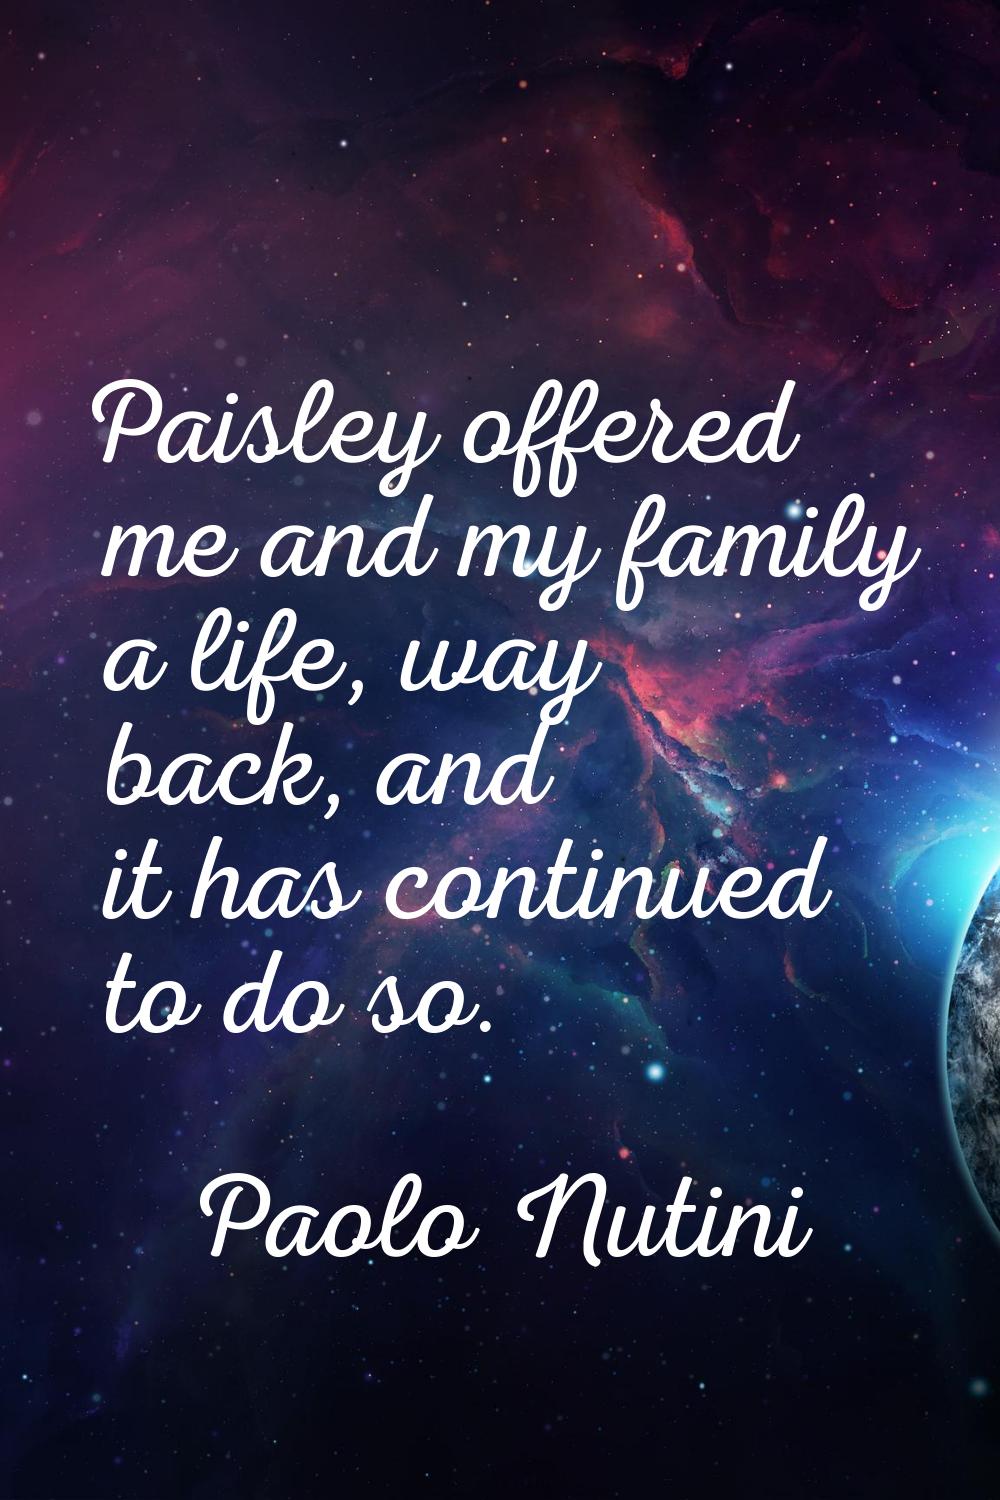 Paisley offered me and my family a life, way back, and it has continued to do so.